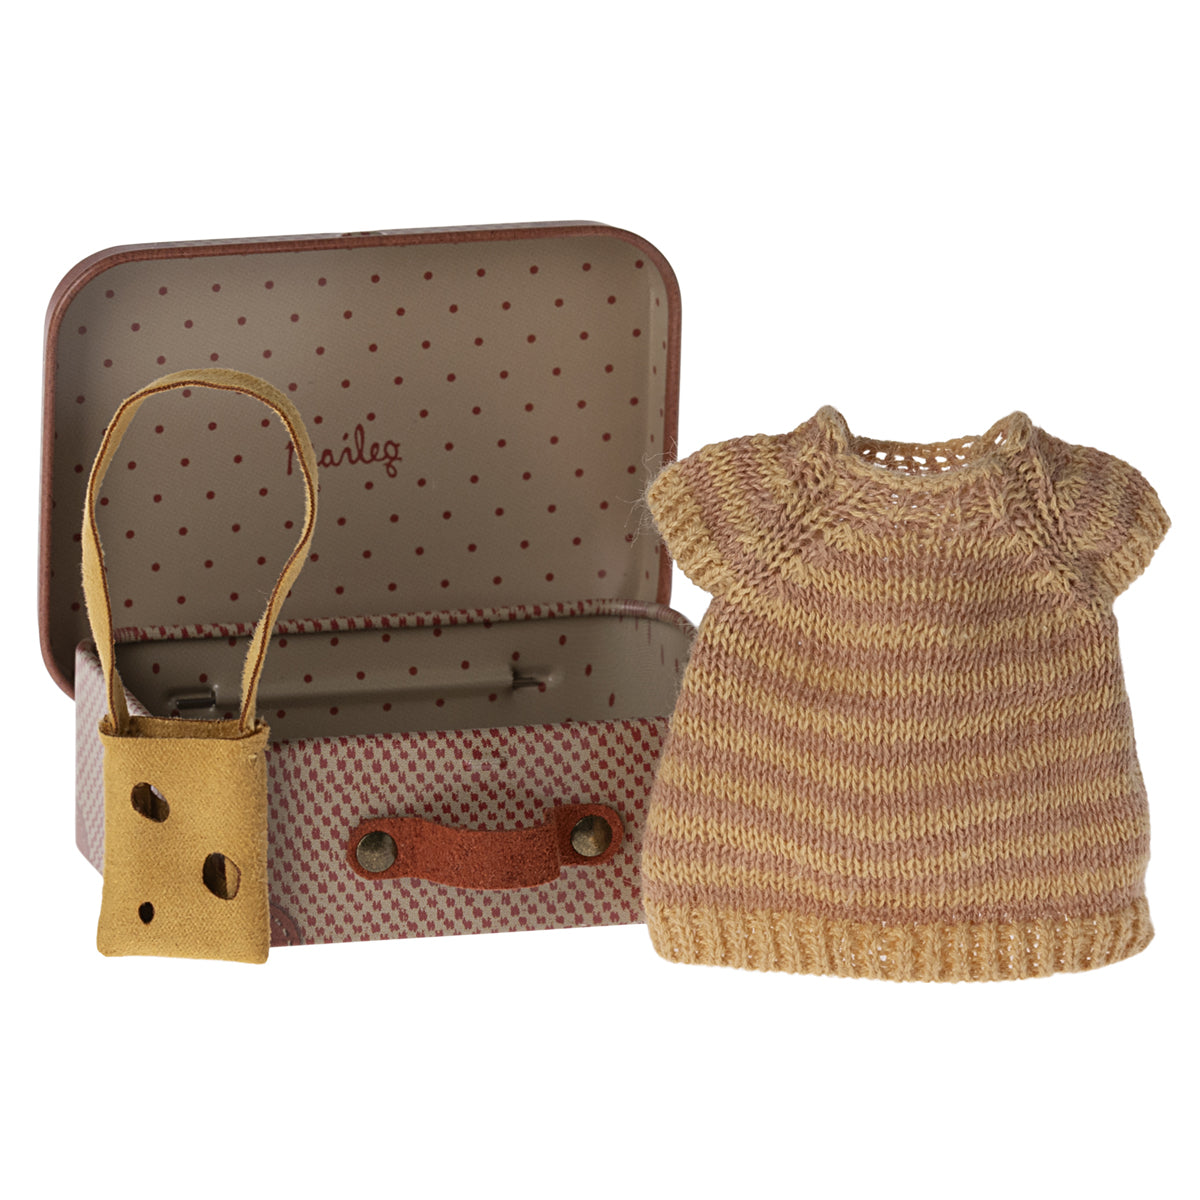 NEW Maileg Mouse Knitted Dress & Bag In A Suitcase - Big Sister